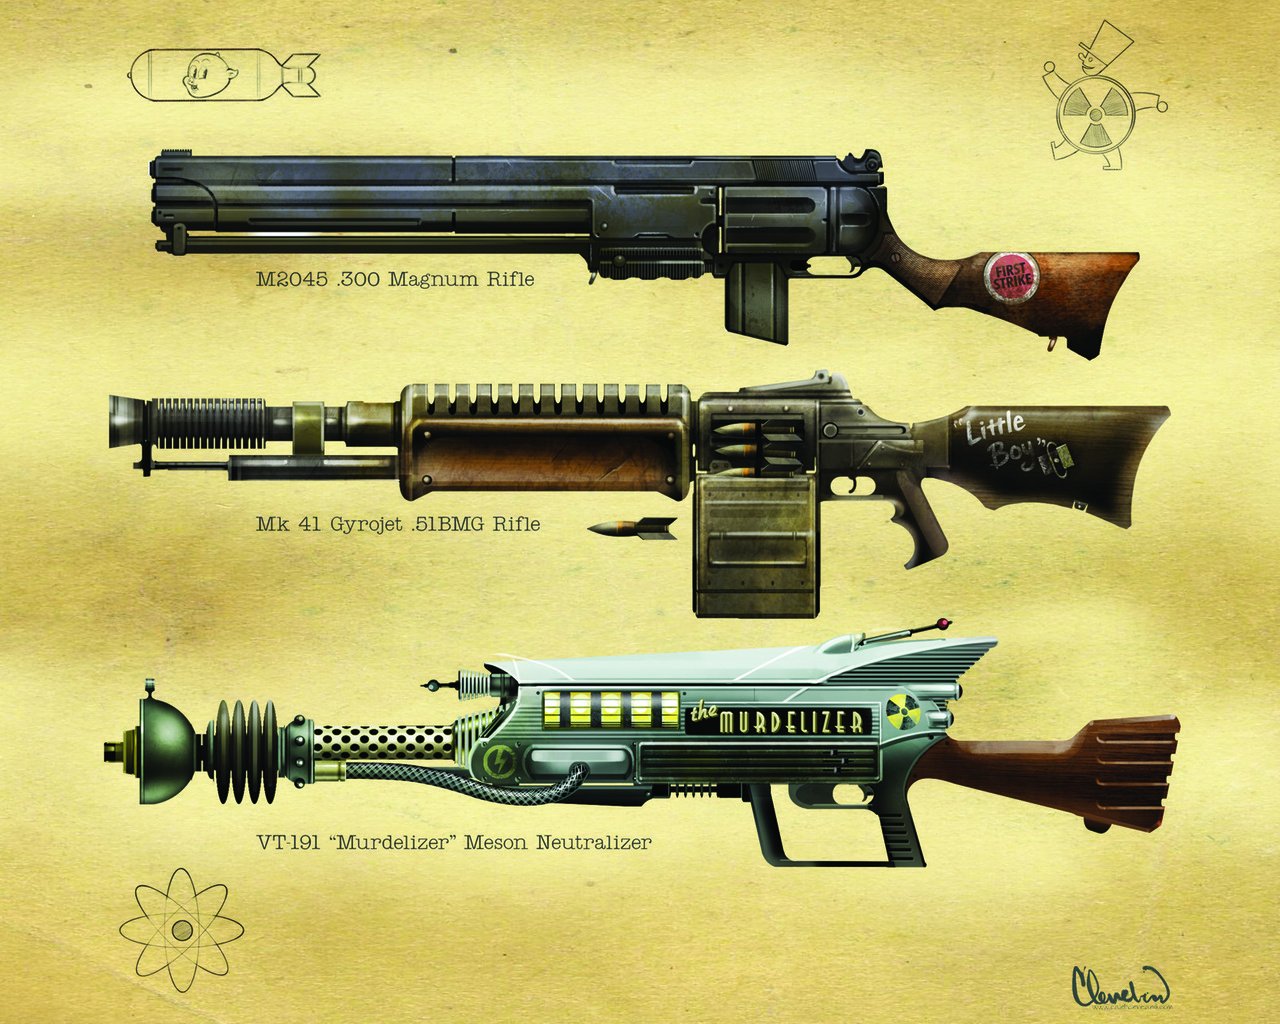 Fallout 4 assault rifle from fallout 3 фото 114